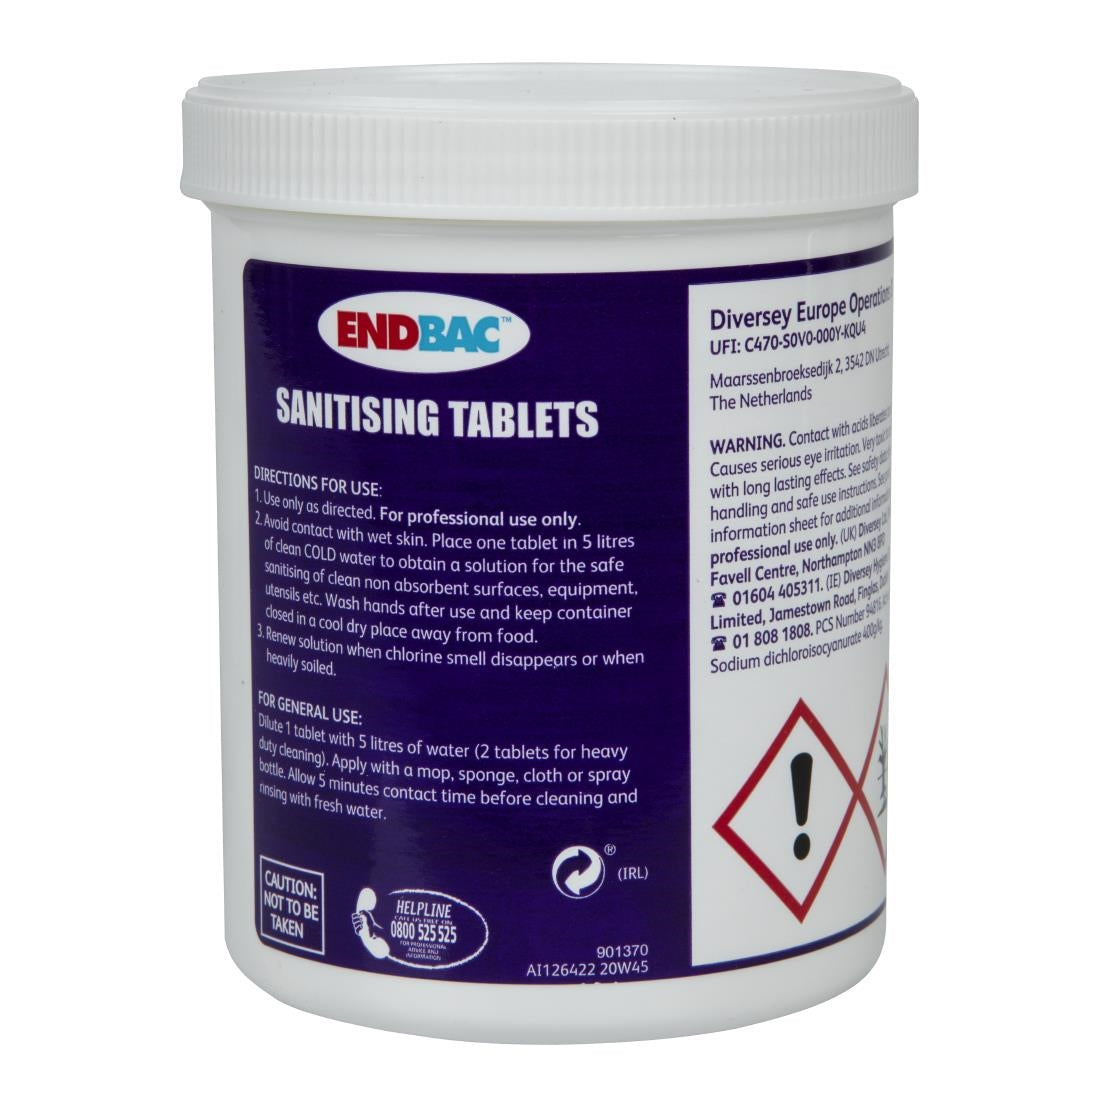 CX847 Endbac Sanitising Tablets (Pack of 230) JD Catering Equipment Solutions Ltd